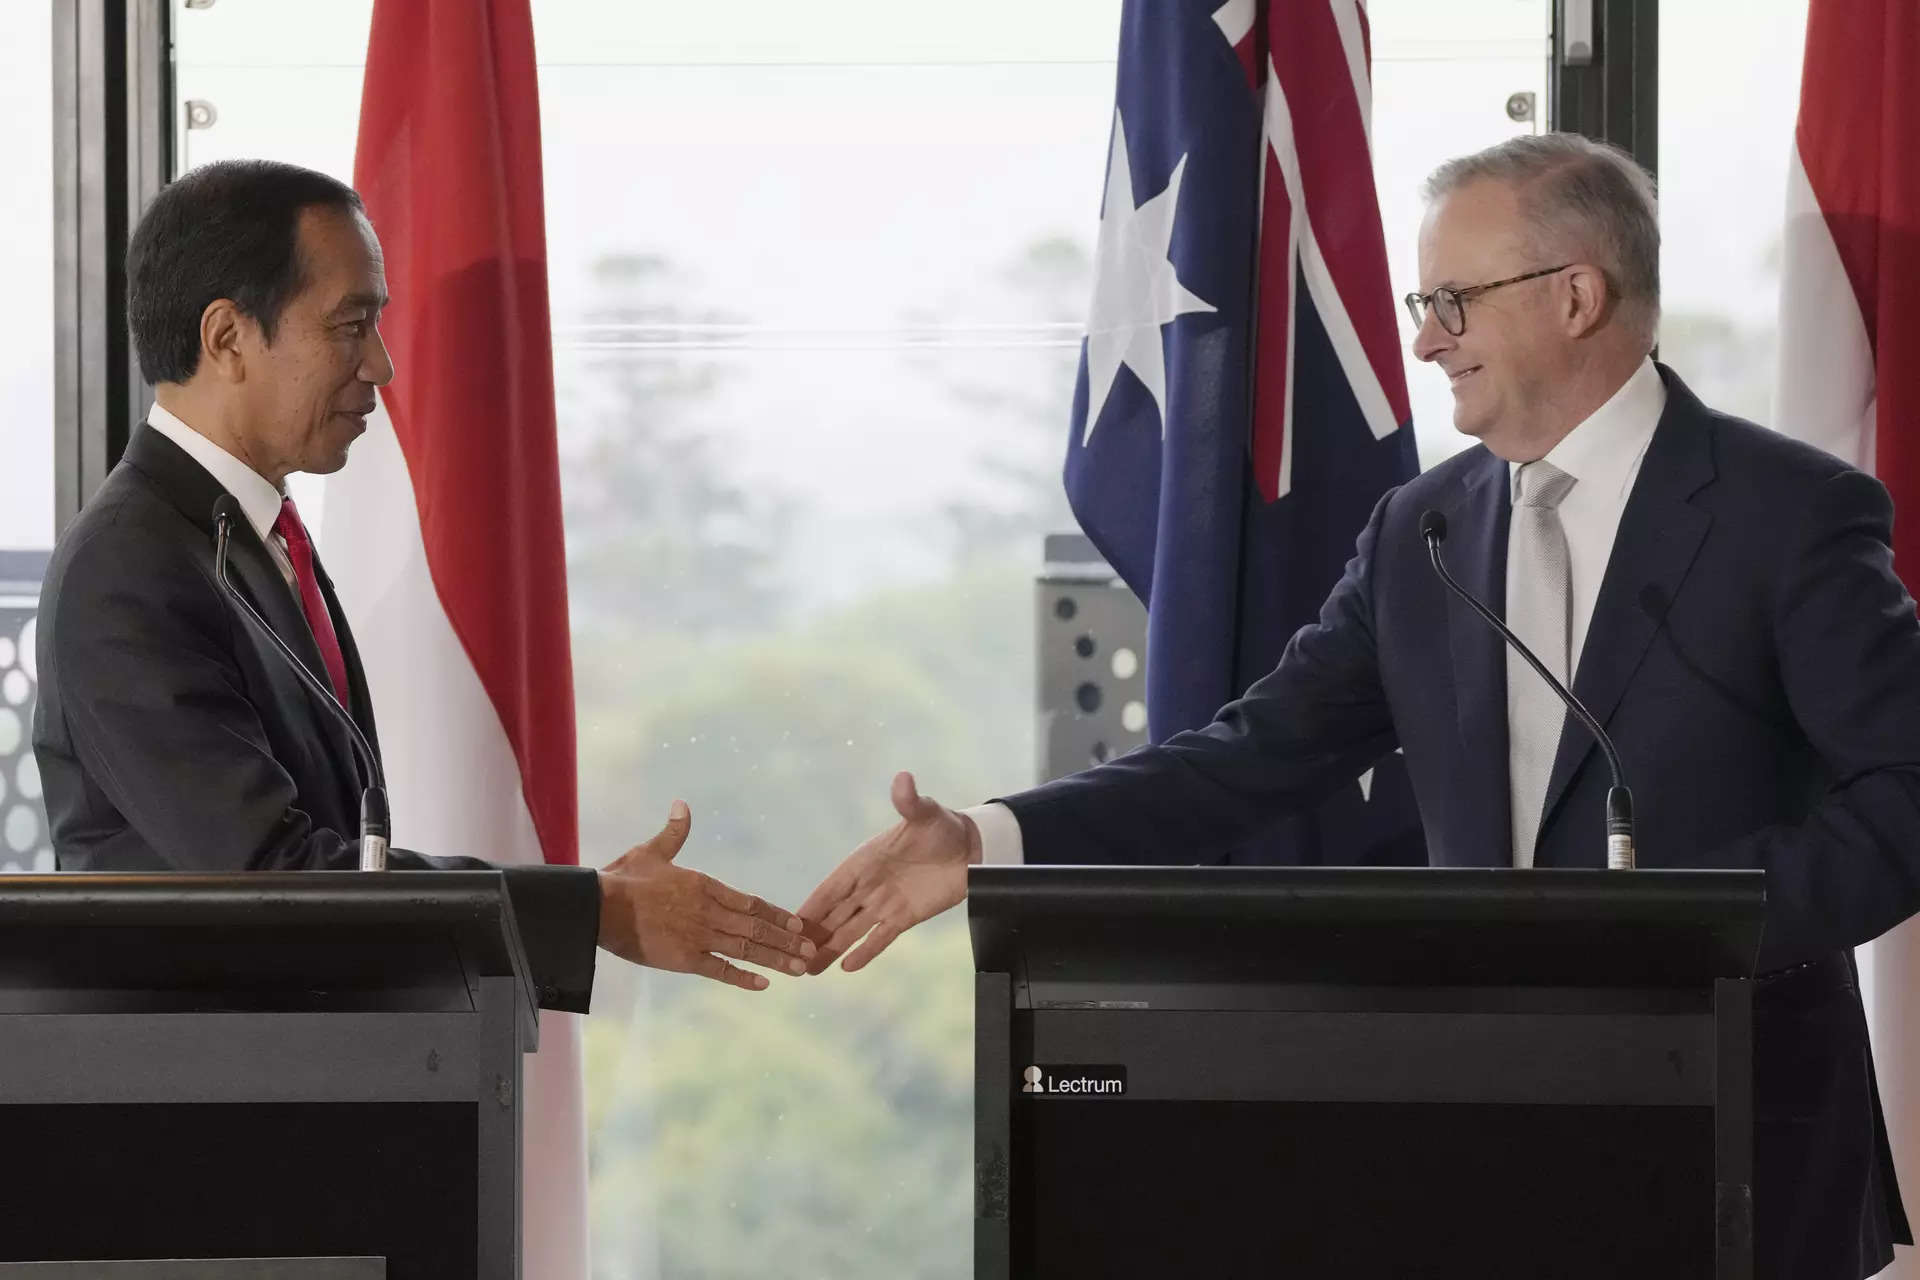 <p>Indonesian President Joko Widodo, left, shakes hands with Australian Prime Minister Anthony Albanese following a joint statement in Sydney, Tuesday, July 4, 2023. Widodo is on a 3-day visit to Australia. (AP Photo/Rick Rycroft)</p>